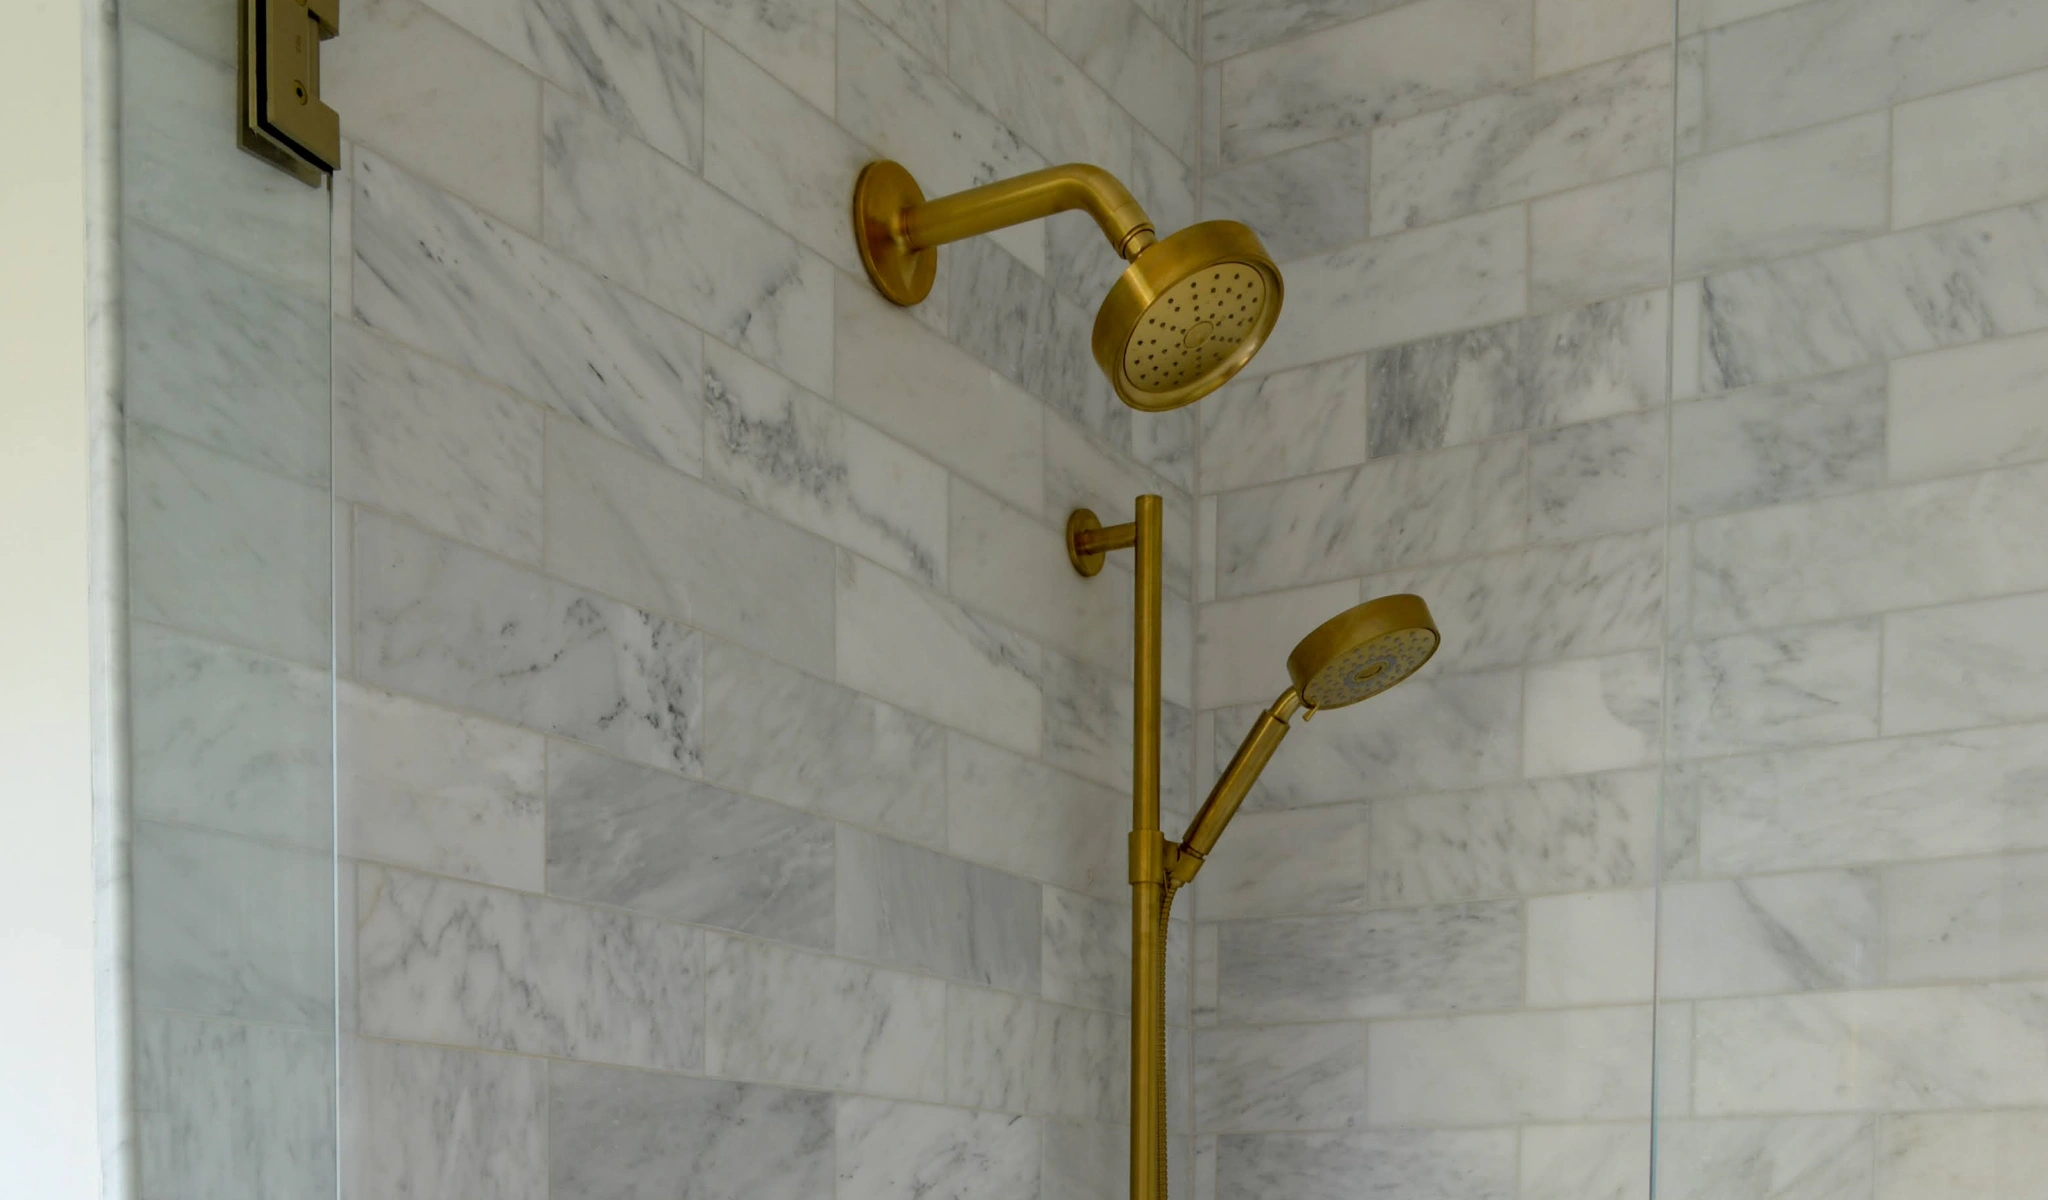 A shower with a luxurious gold shower head.